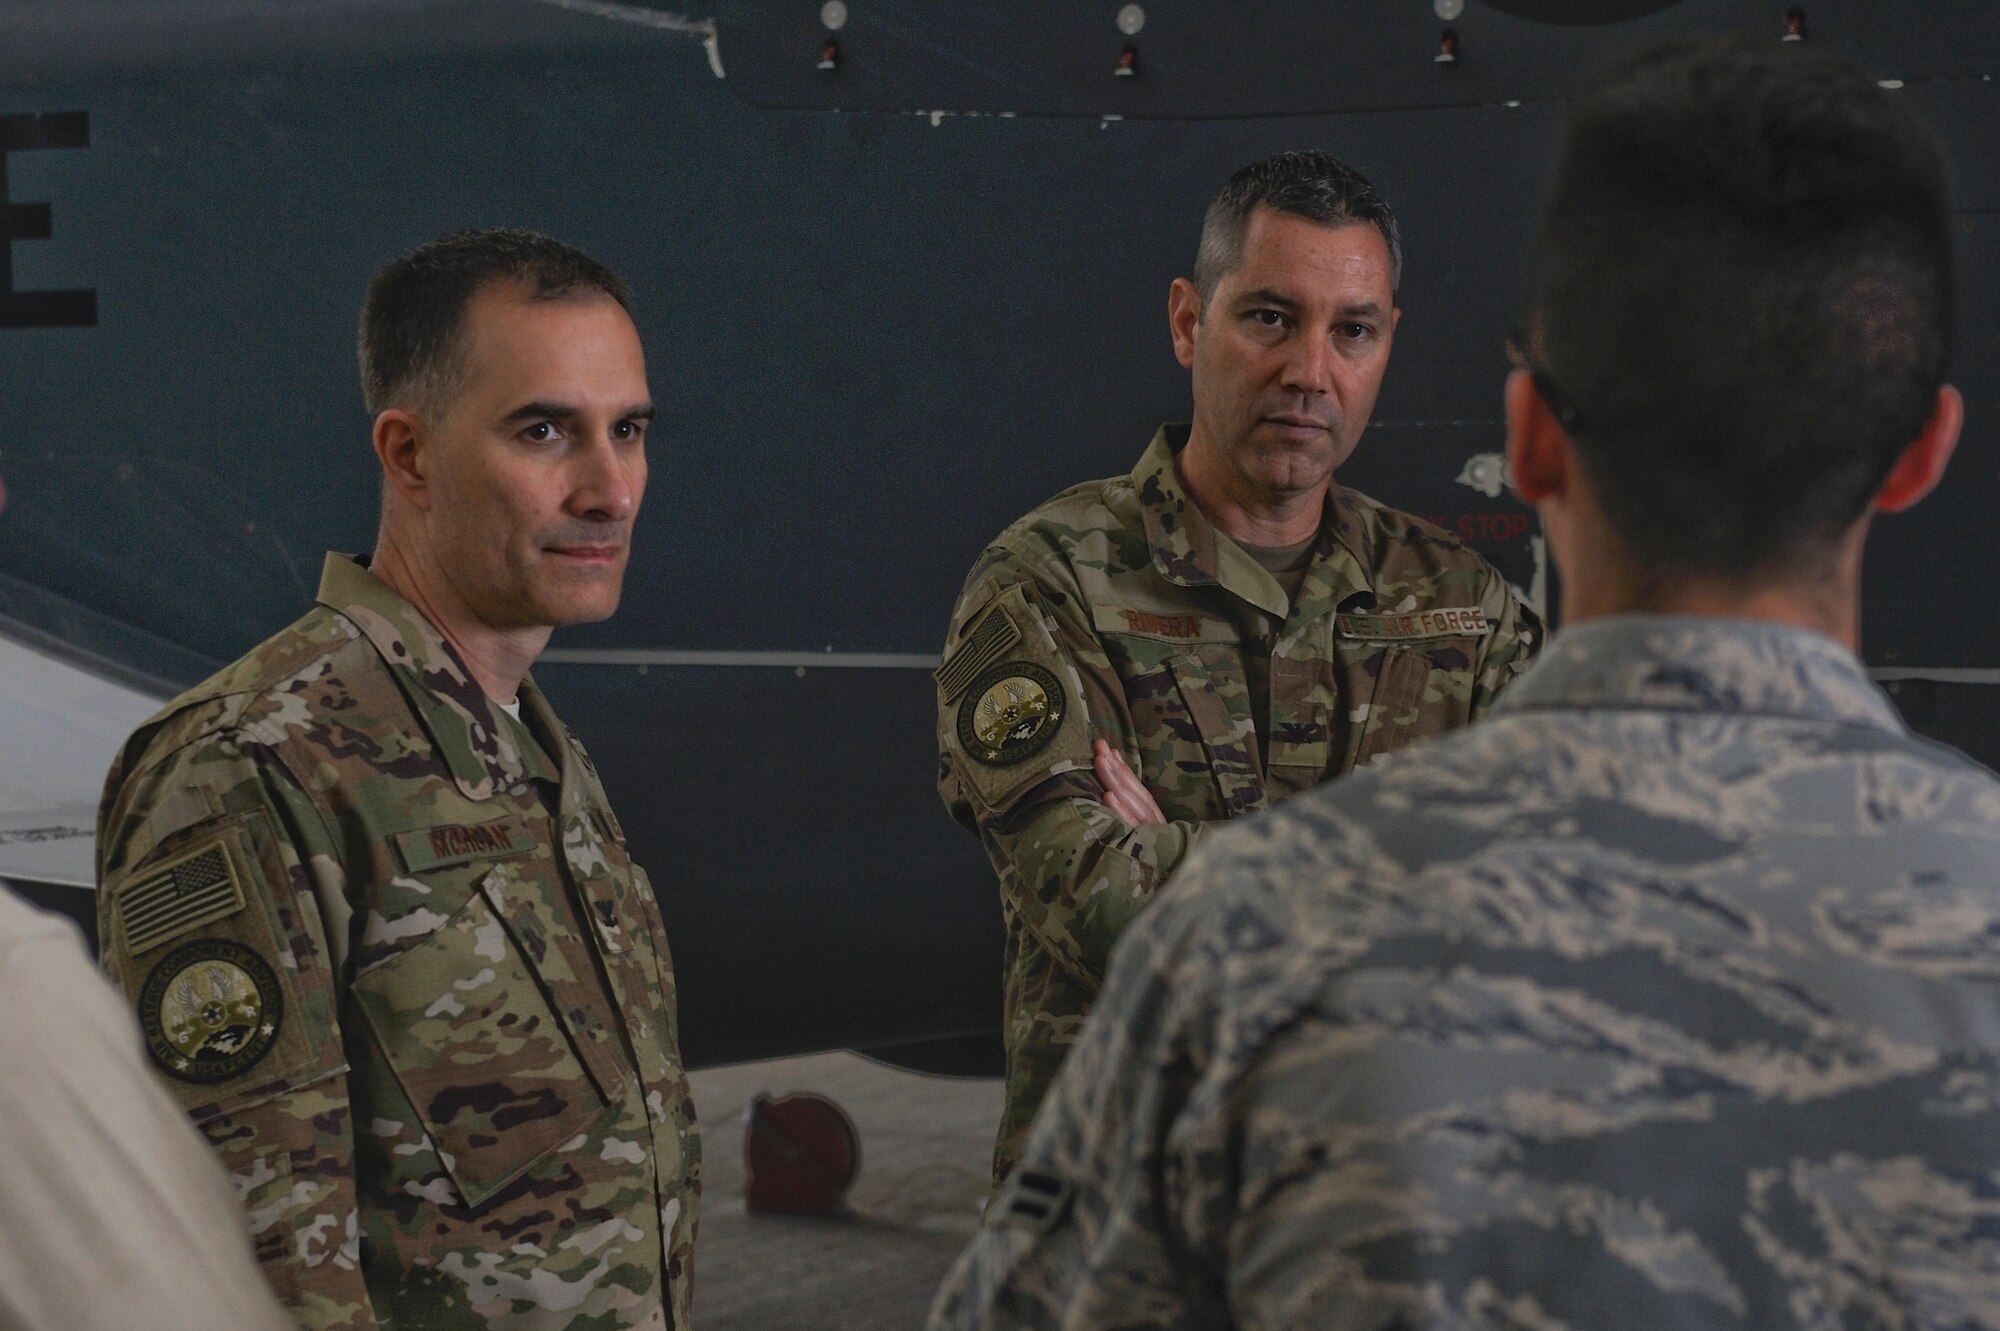 U.S. Air Force Col. Eric Rivera and Col. Troy Morgan, Air Forces Central Command air reserve component advisors, listen to a briefing on Al Dhafra Air Base, United Arab Emirates, Feb. 7, 2018. The ARC advisors traveled to ADAB in an effort to ease the transition between deployments for Air National Guardsmen and Air Force Reservists. (U.S. Air Force photo by Airman 1st Class D. Blake Browning)